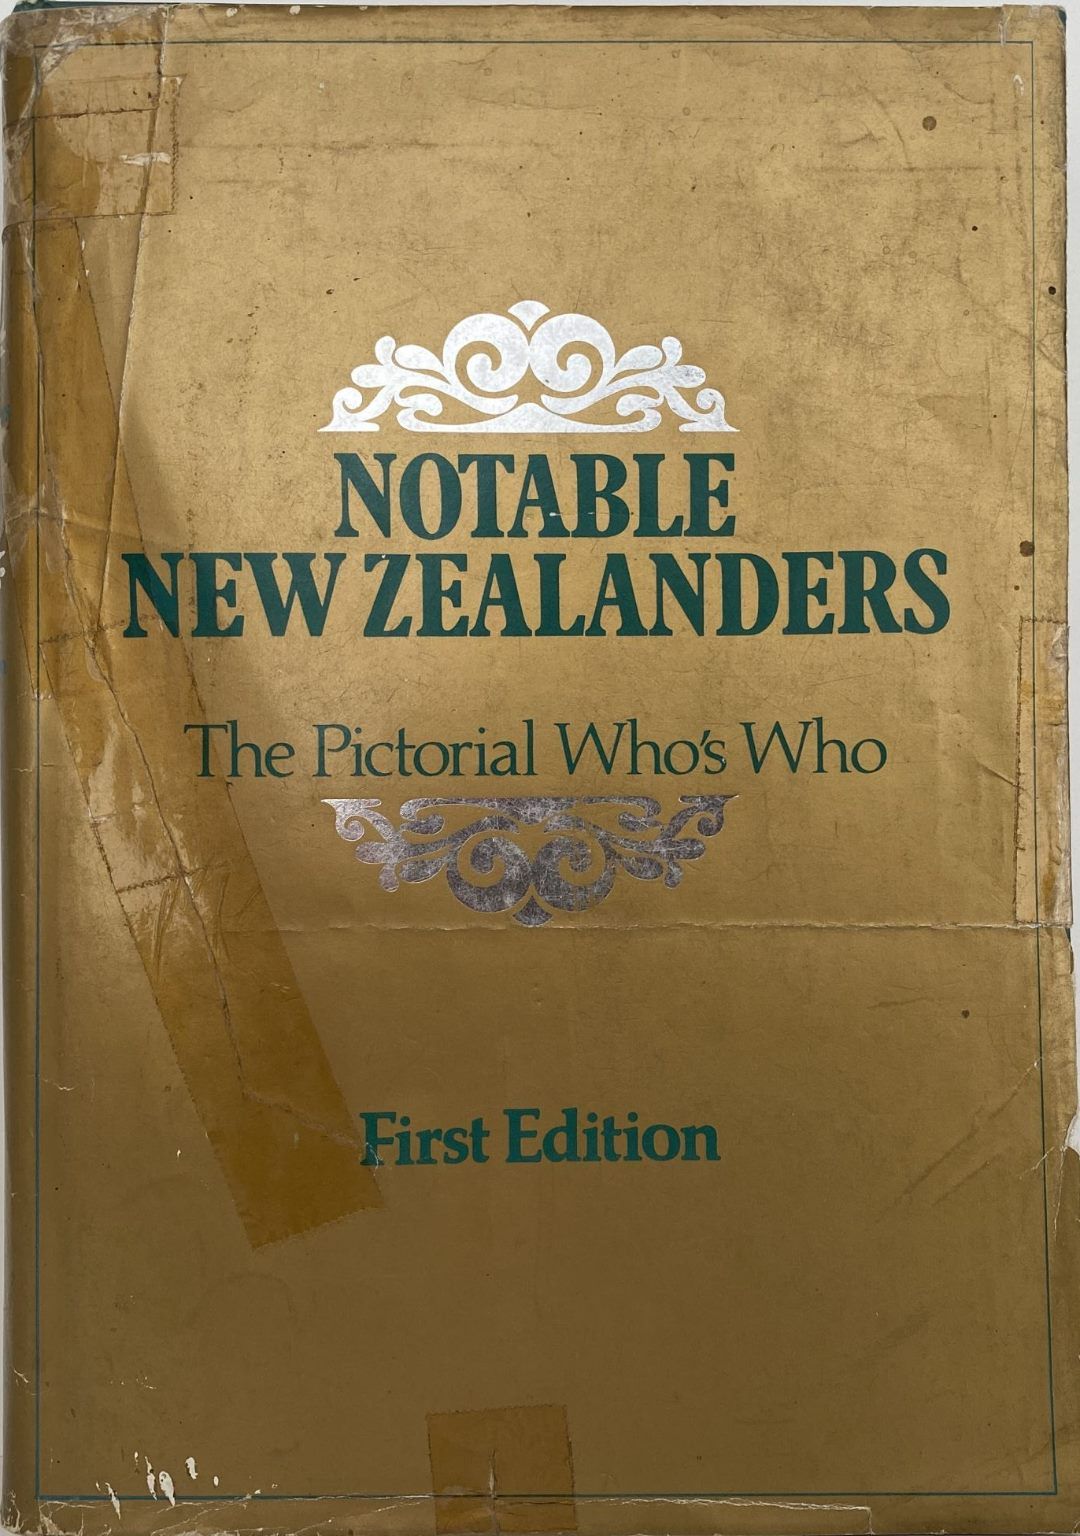 NOTABLE NEW ZEALANDERS: The Pictorial Who's Who 1979